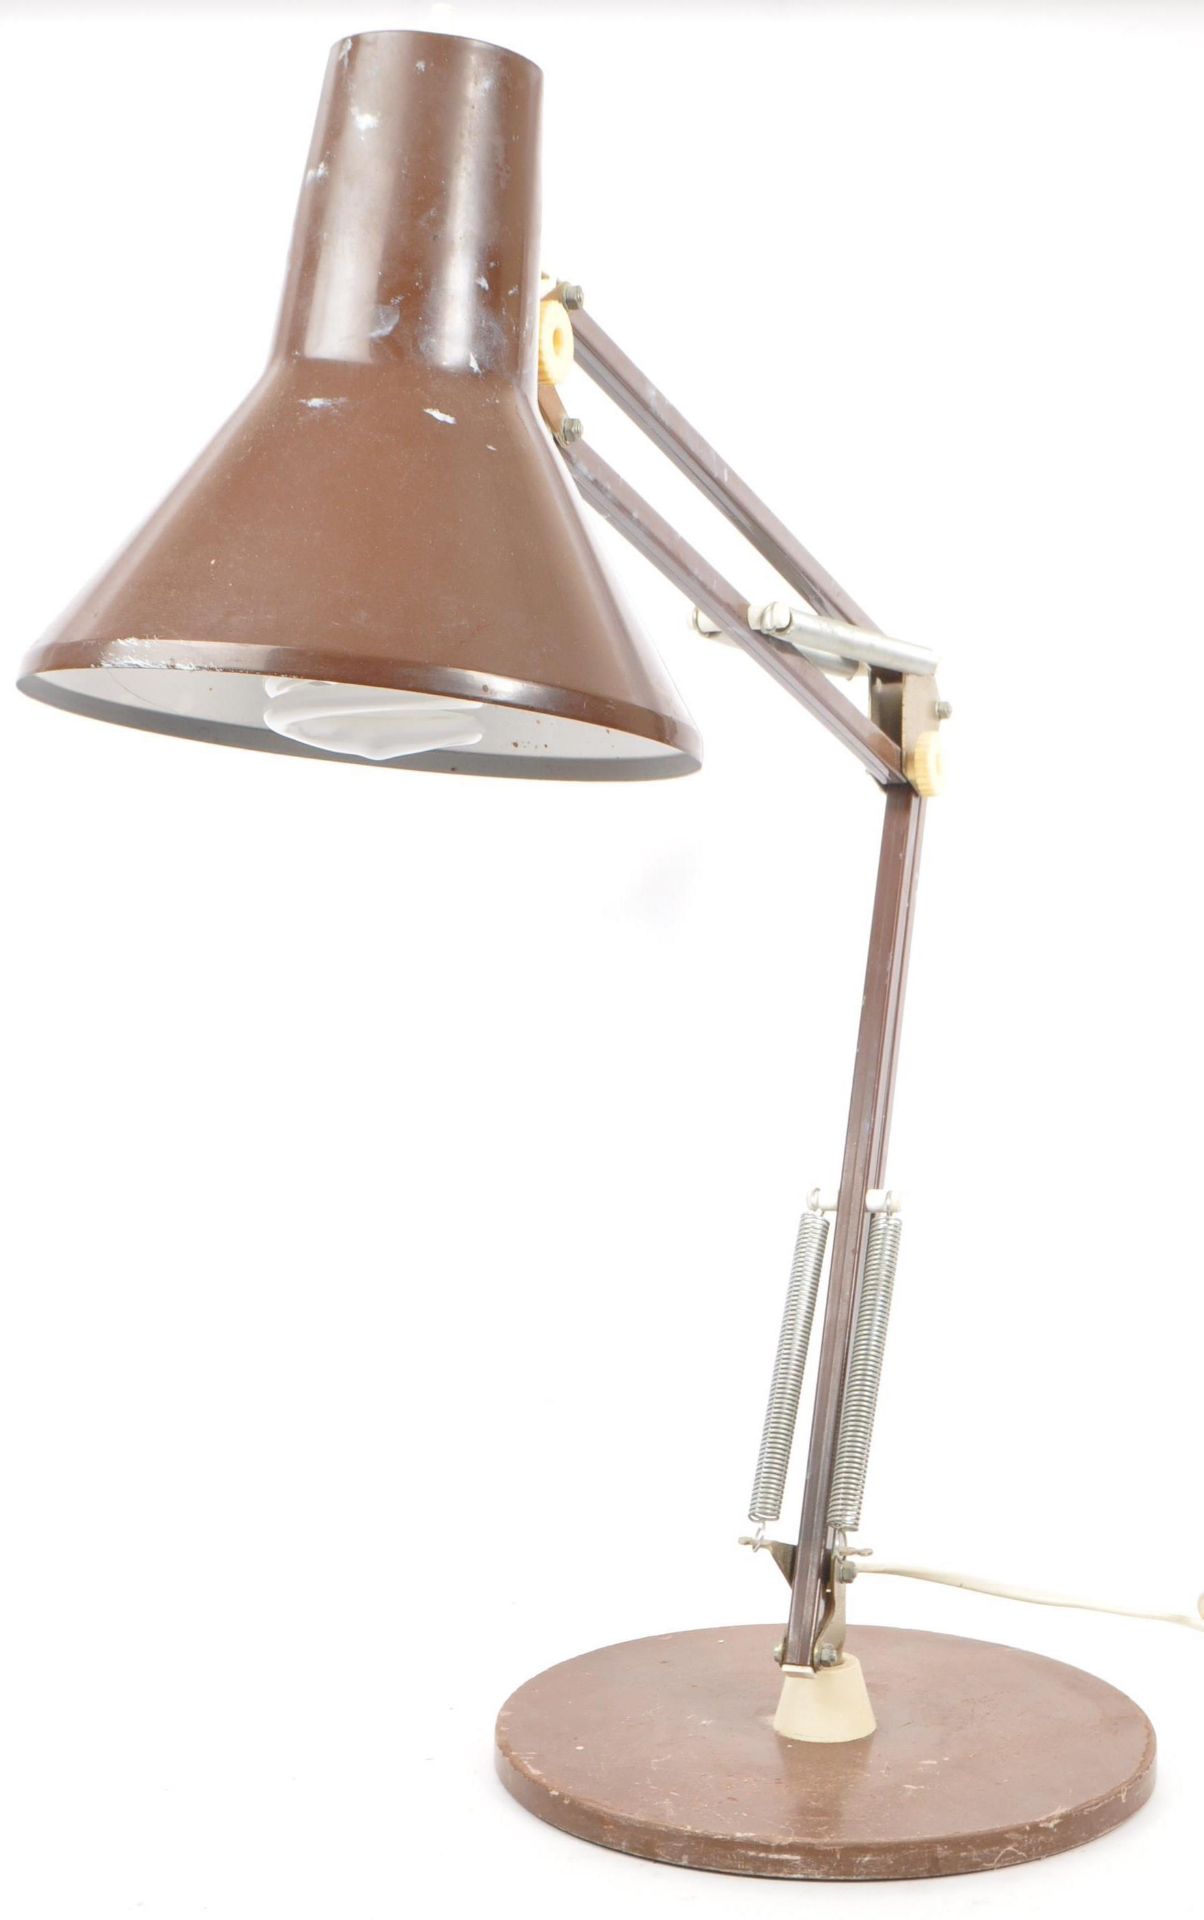 MID 20TH CENTURY INDUSTRIAL FACTORY TABLE DESK LAMP - Image 4 of 5